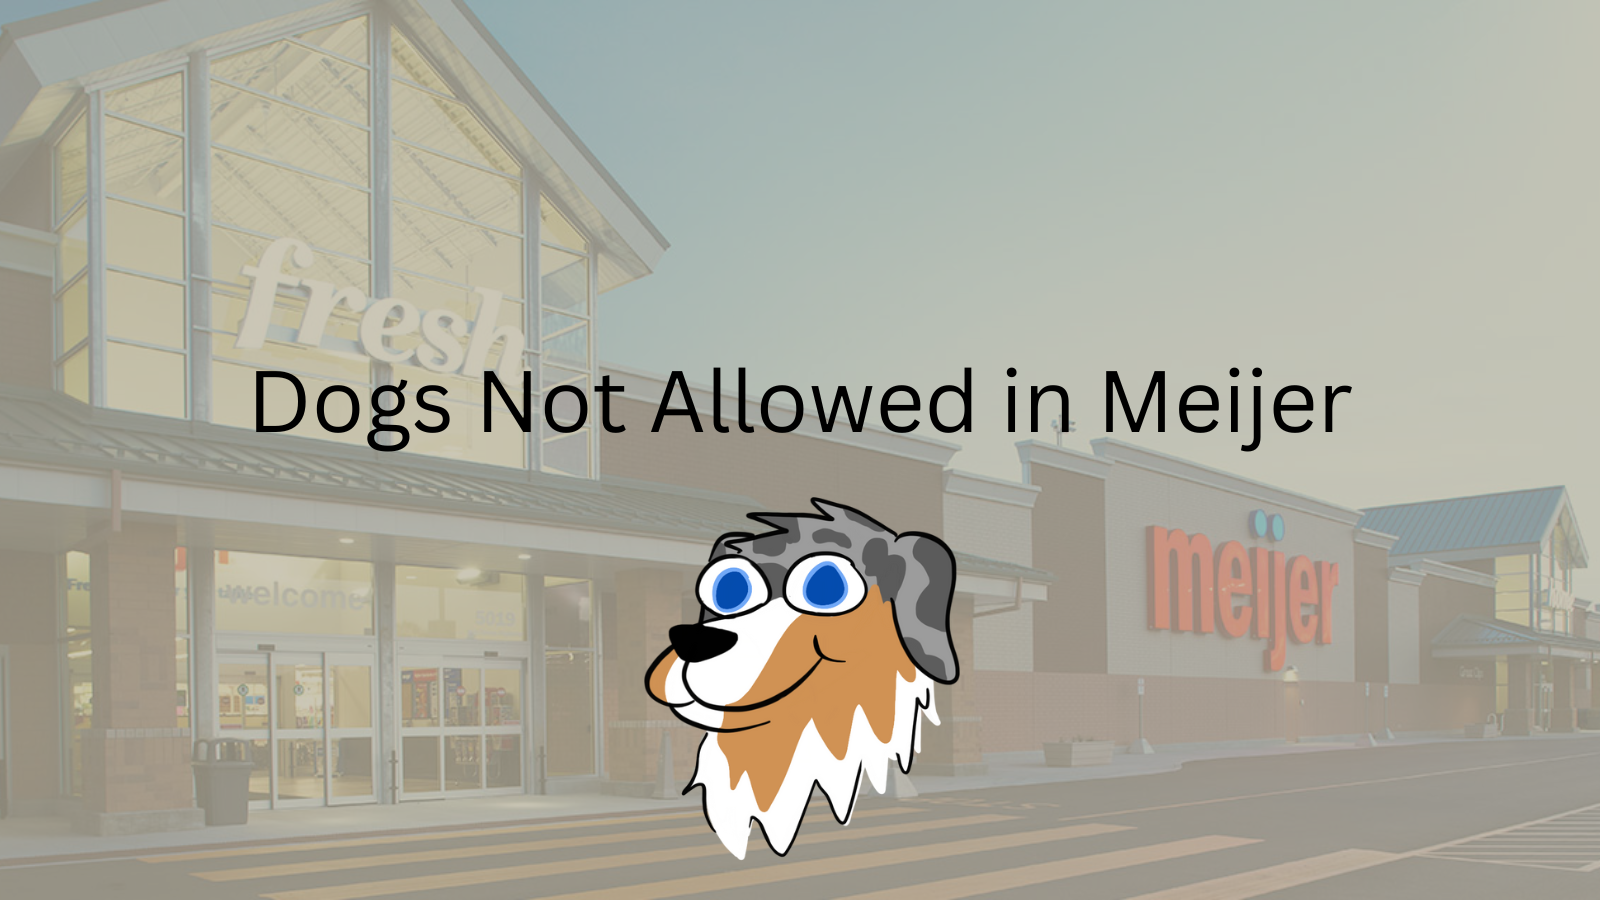 Image Text: "Dogs Not Allowed in Meijer"